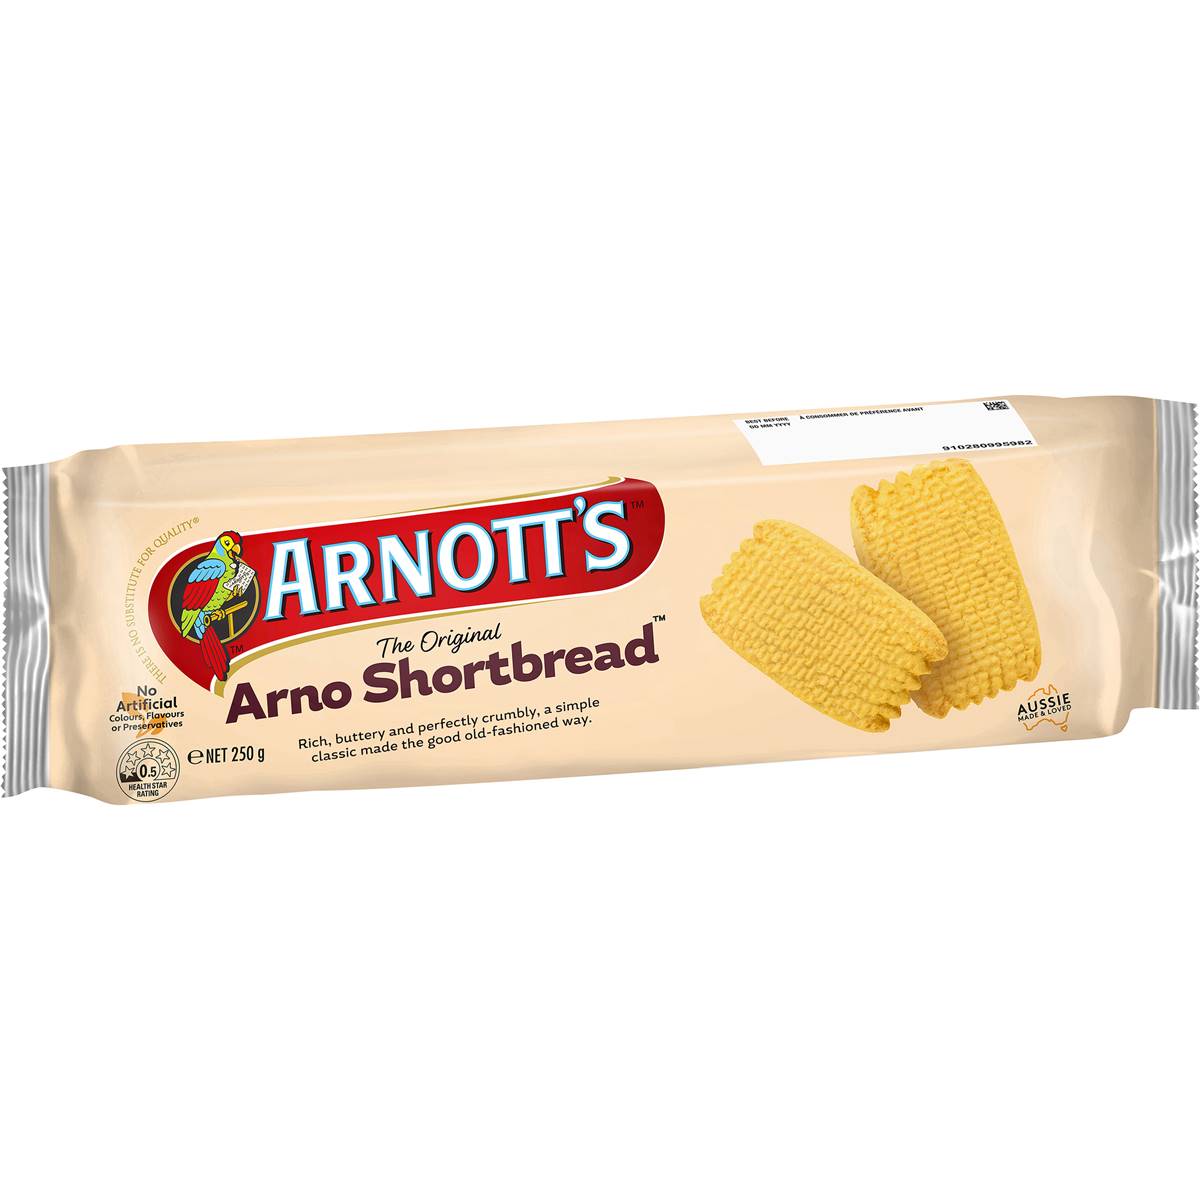 Calories In Arnotts Arno Shortbread Plain Biscuits Calcount 1523